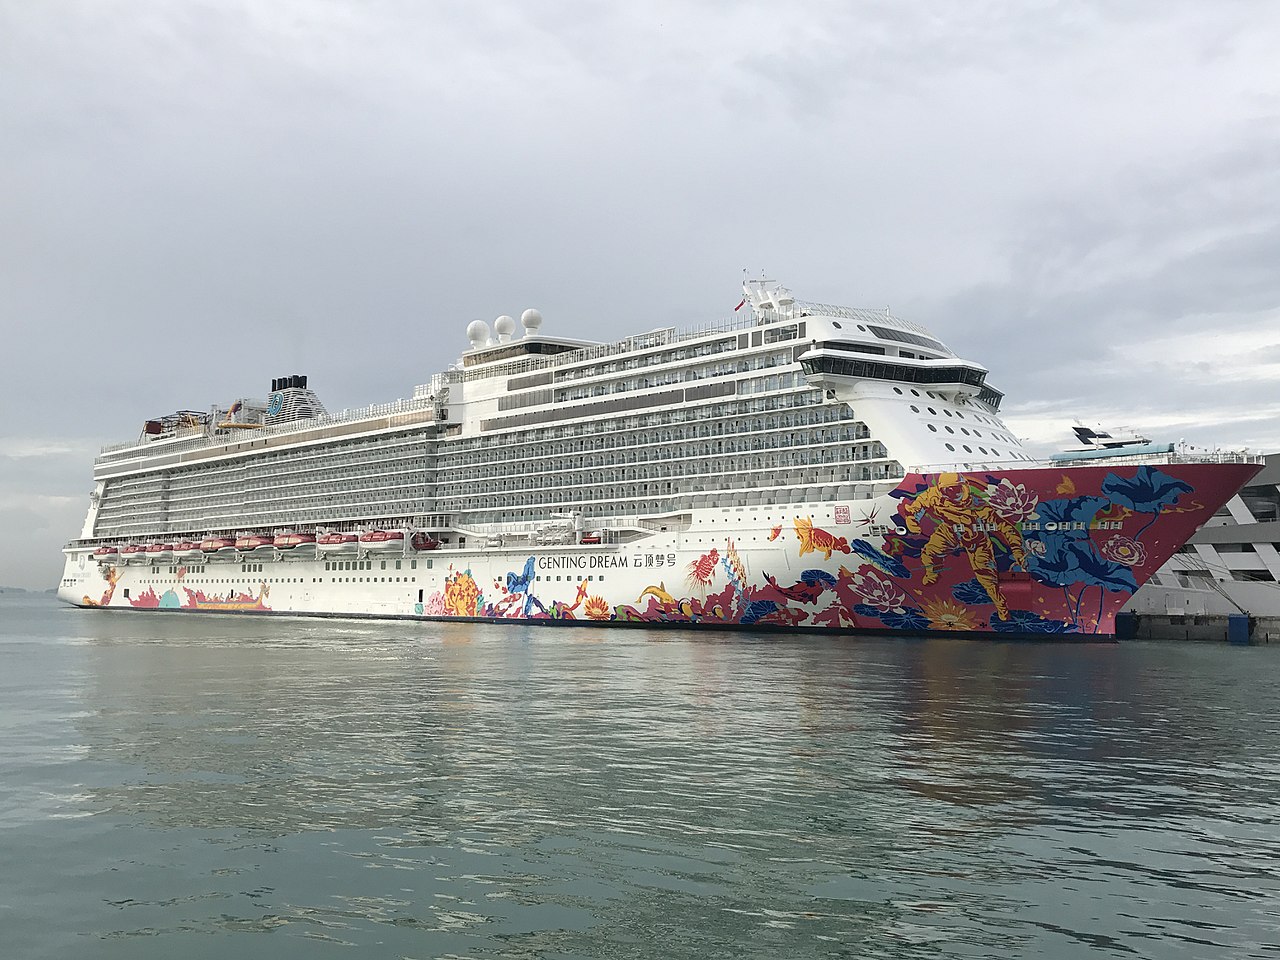 Genting Dream at Marina Bay Cruise Centre in Singapore